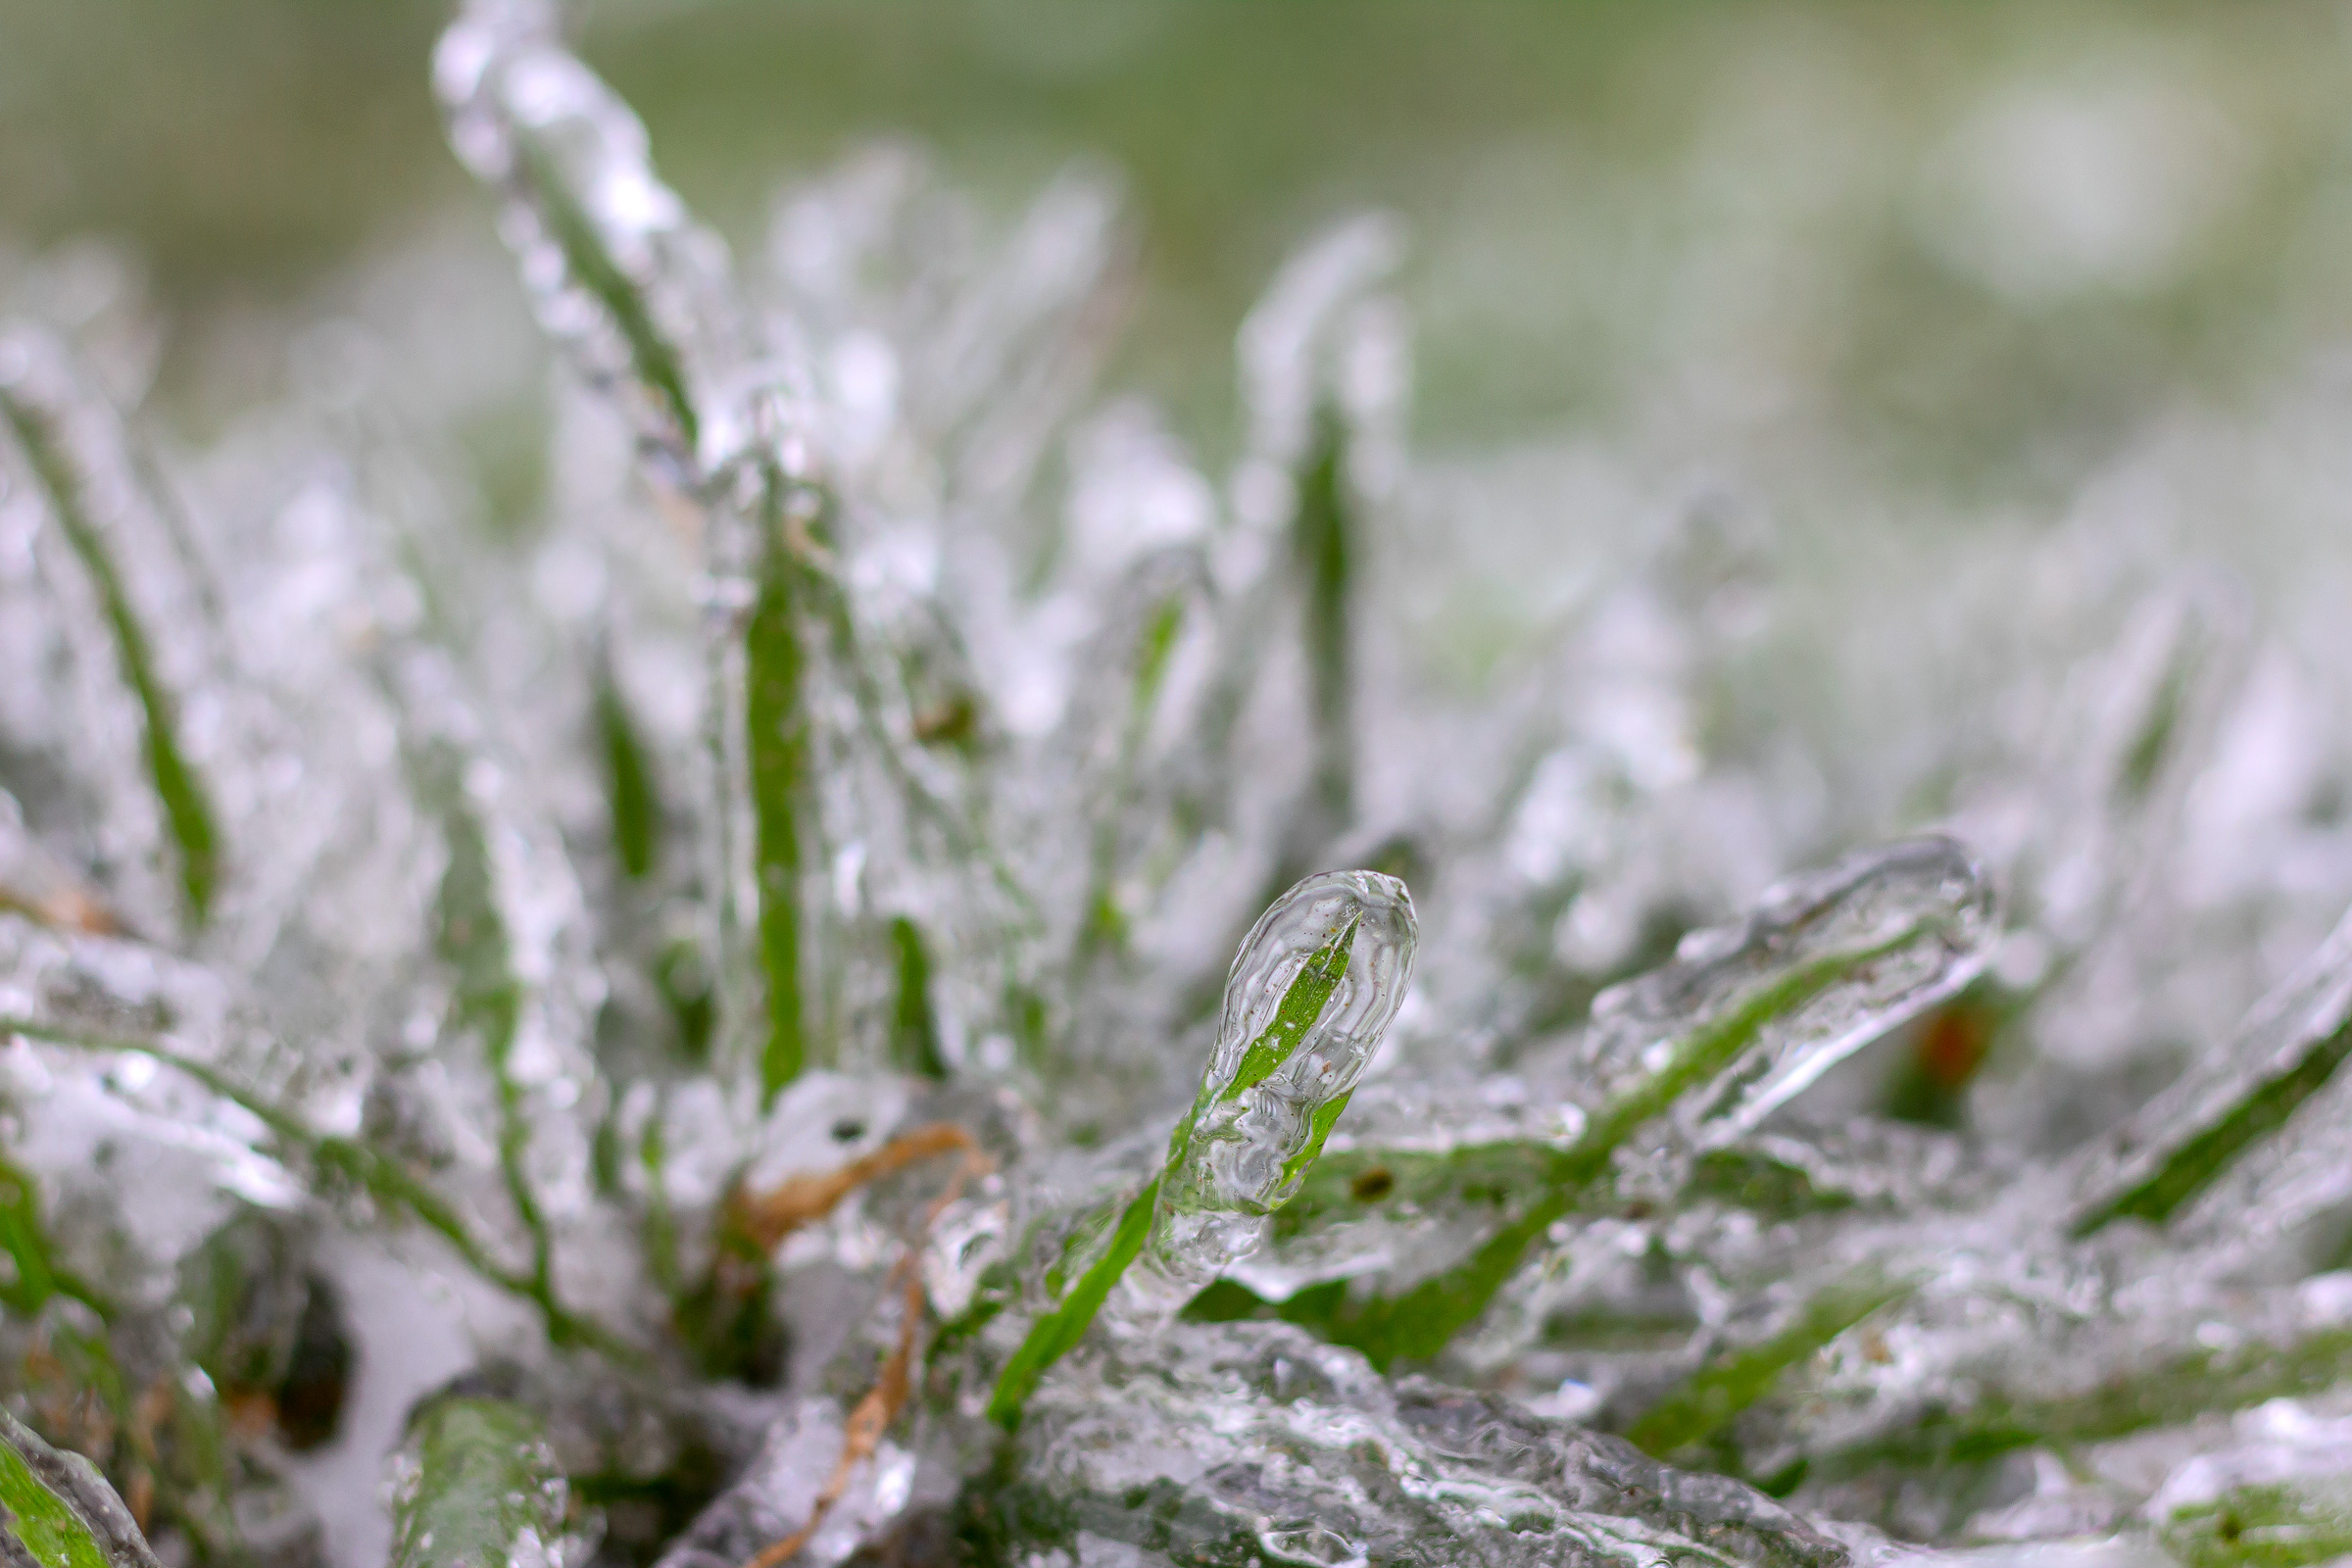 Ice-covered grass after freezing rain